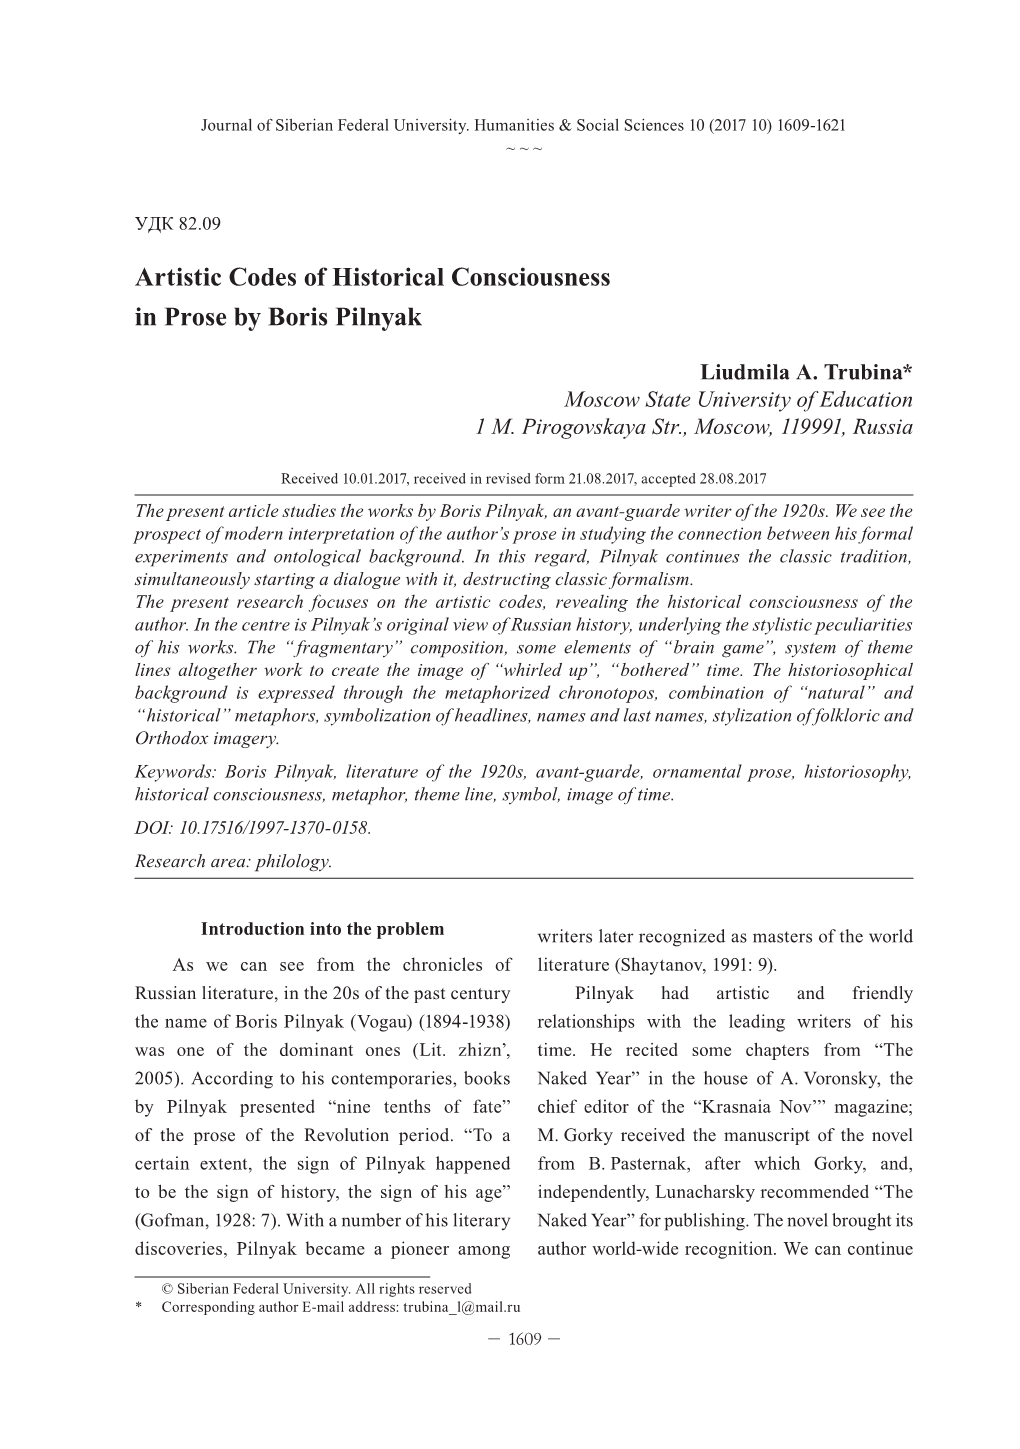 Artistic Codes of Historical Consciousness in Prose by Boris Pilnyak